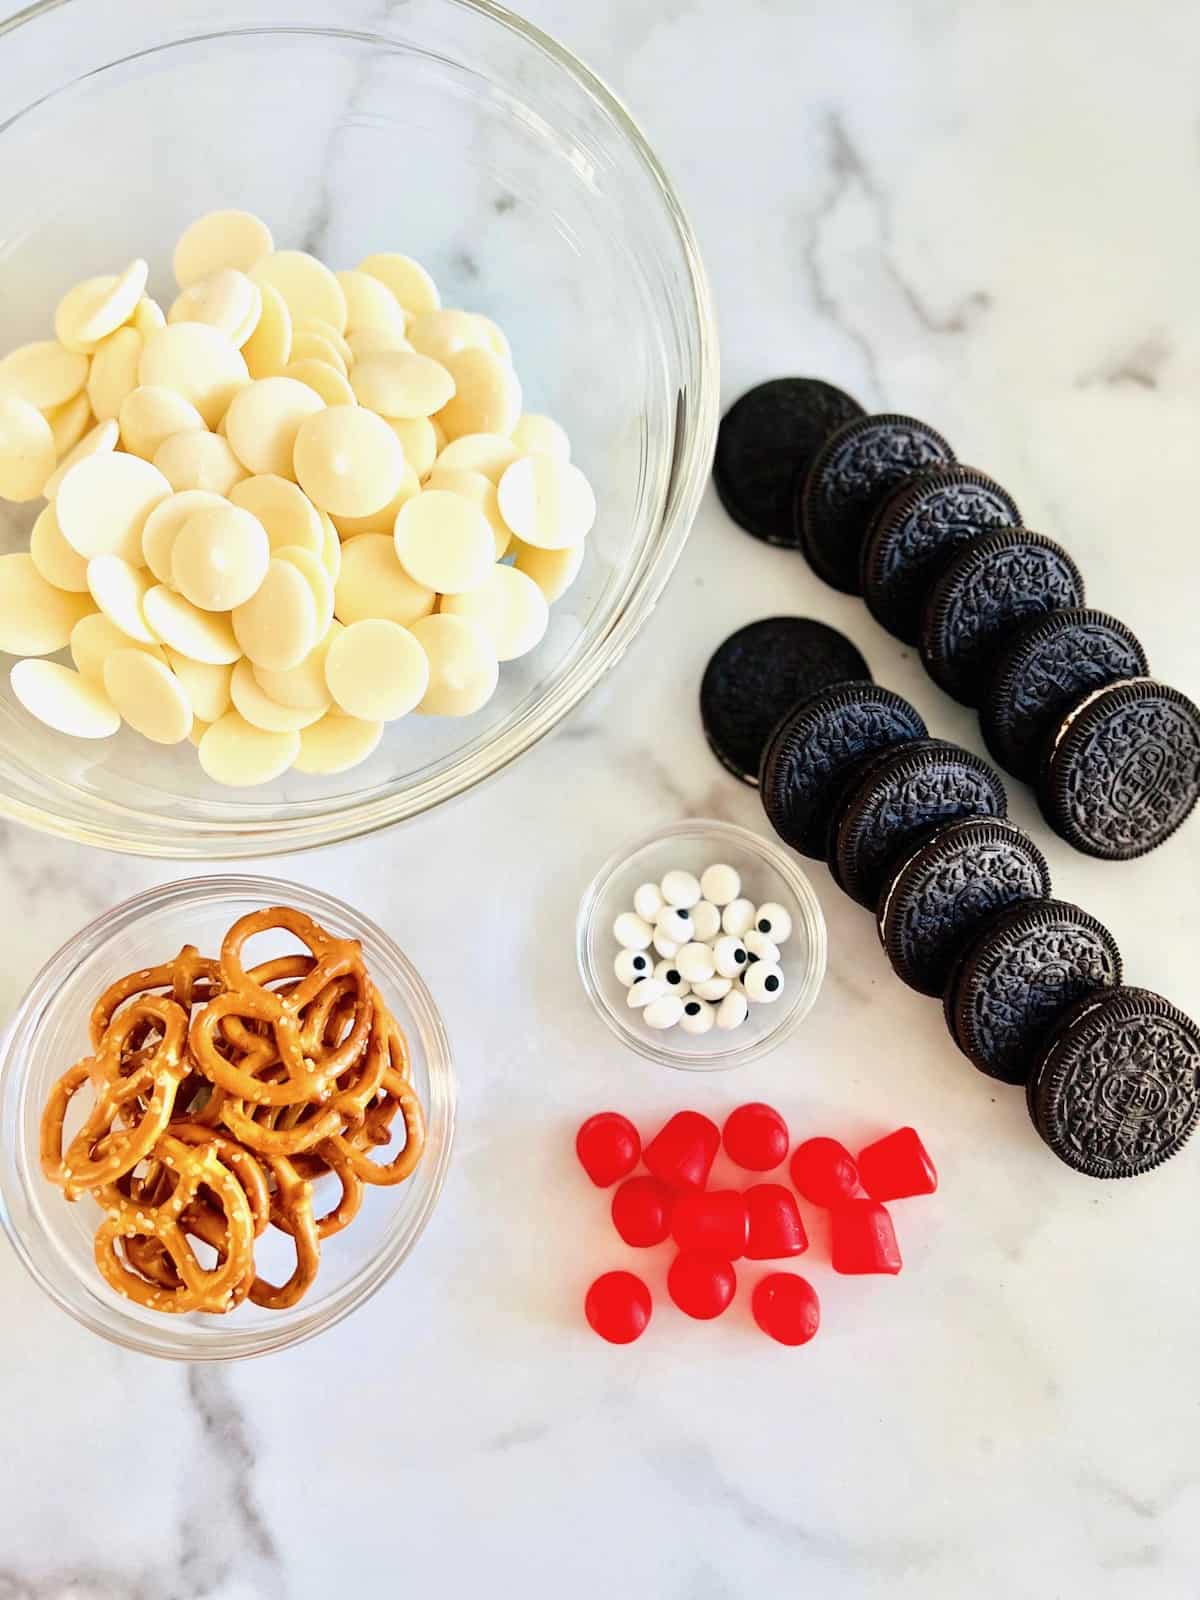 Ingredients on a table to make dipped oreo snowmen.